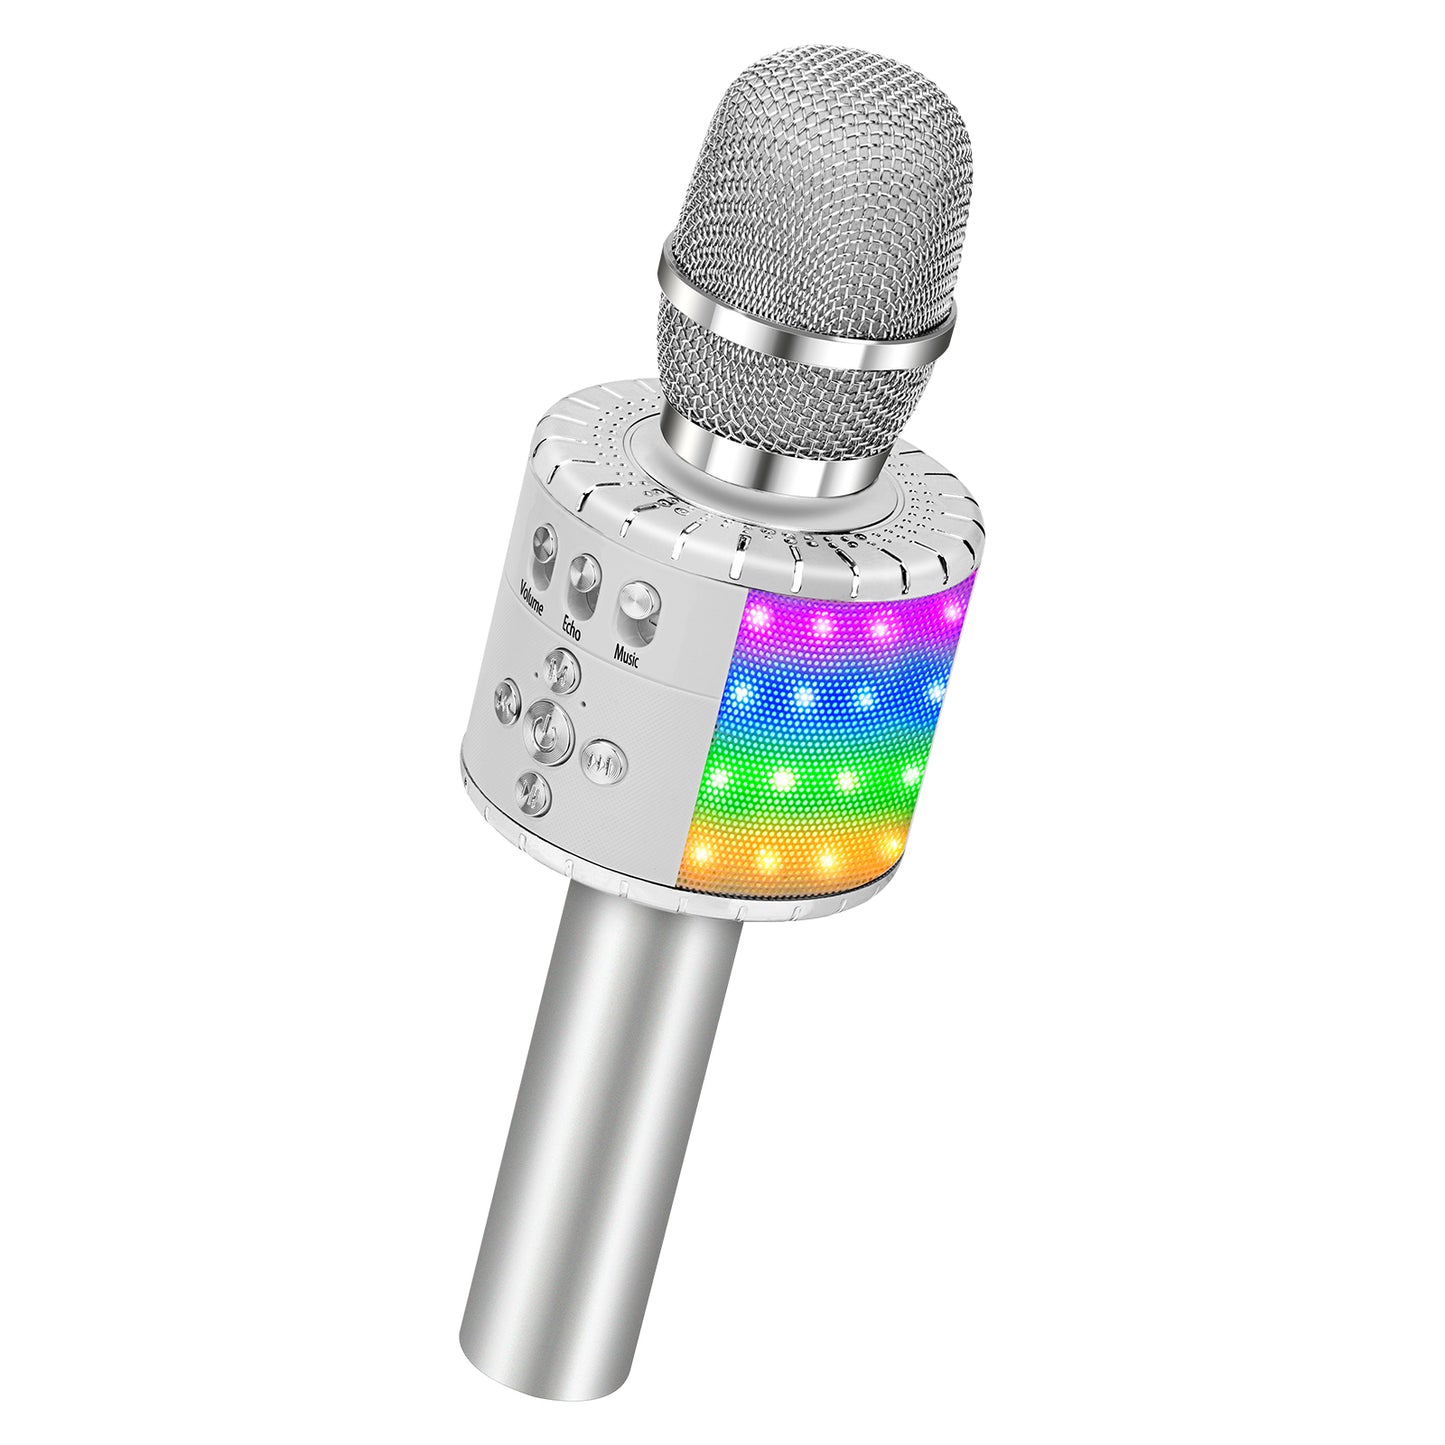 BONAOK Wireless Bluetooth Karaoke Microphone with Multi-color LED Lights, 4 in 1 Portable Handheld Karaoke Speaker Machine Thanksgiving Day for Android/iPhone/iPad/Sony/PC or All Smartphone (Silver)